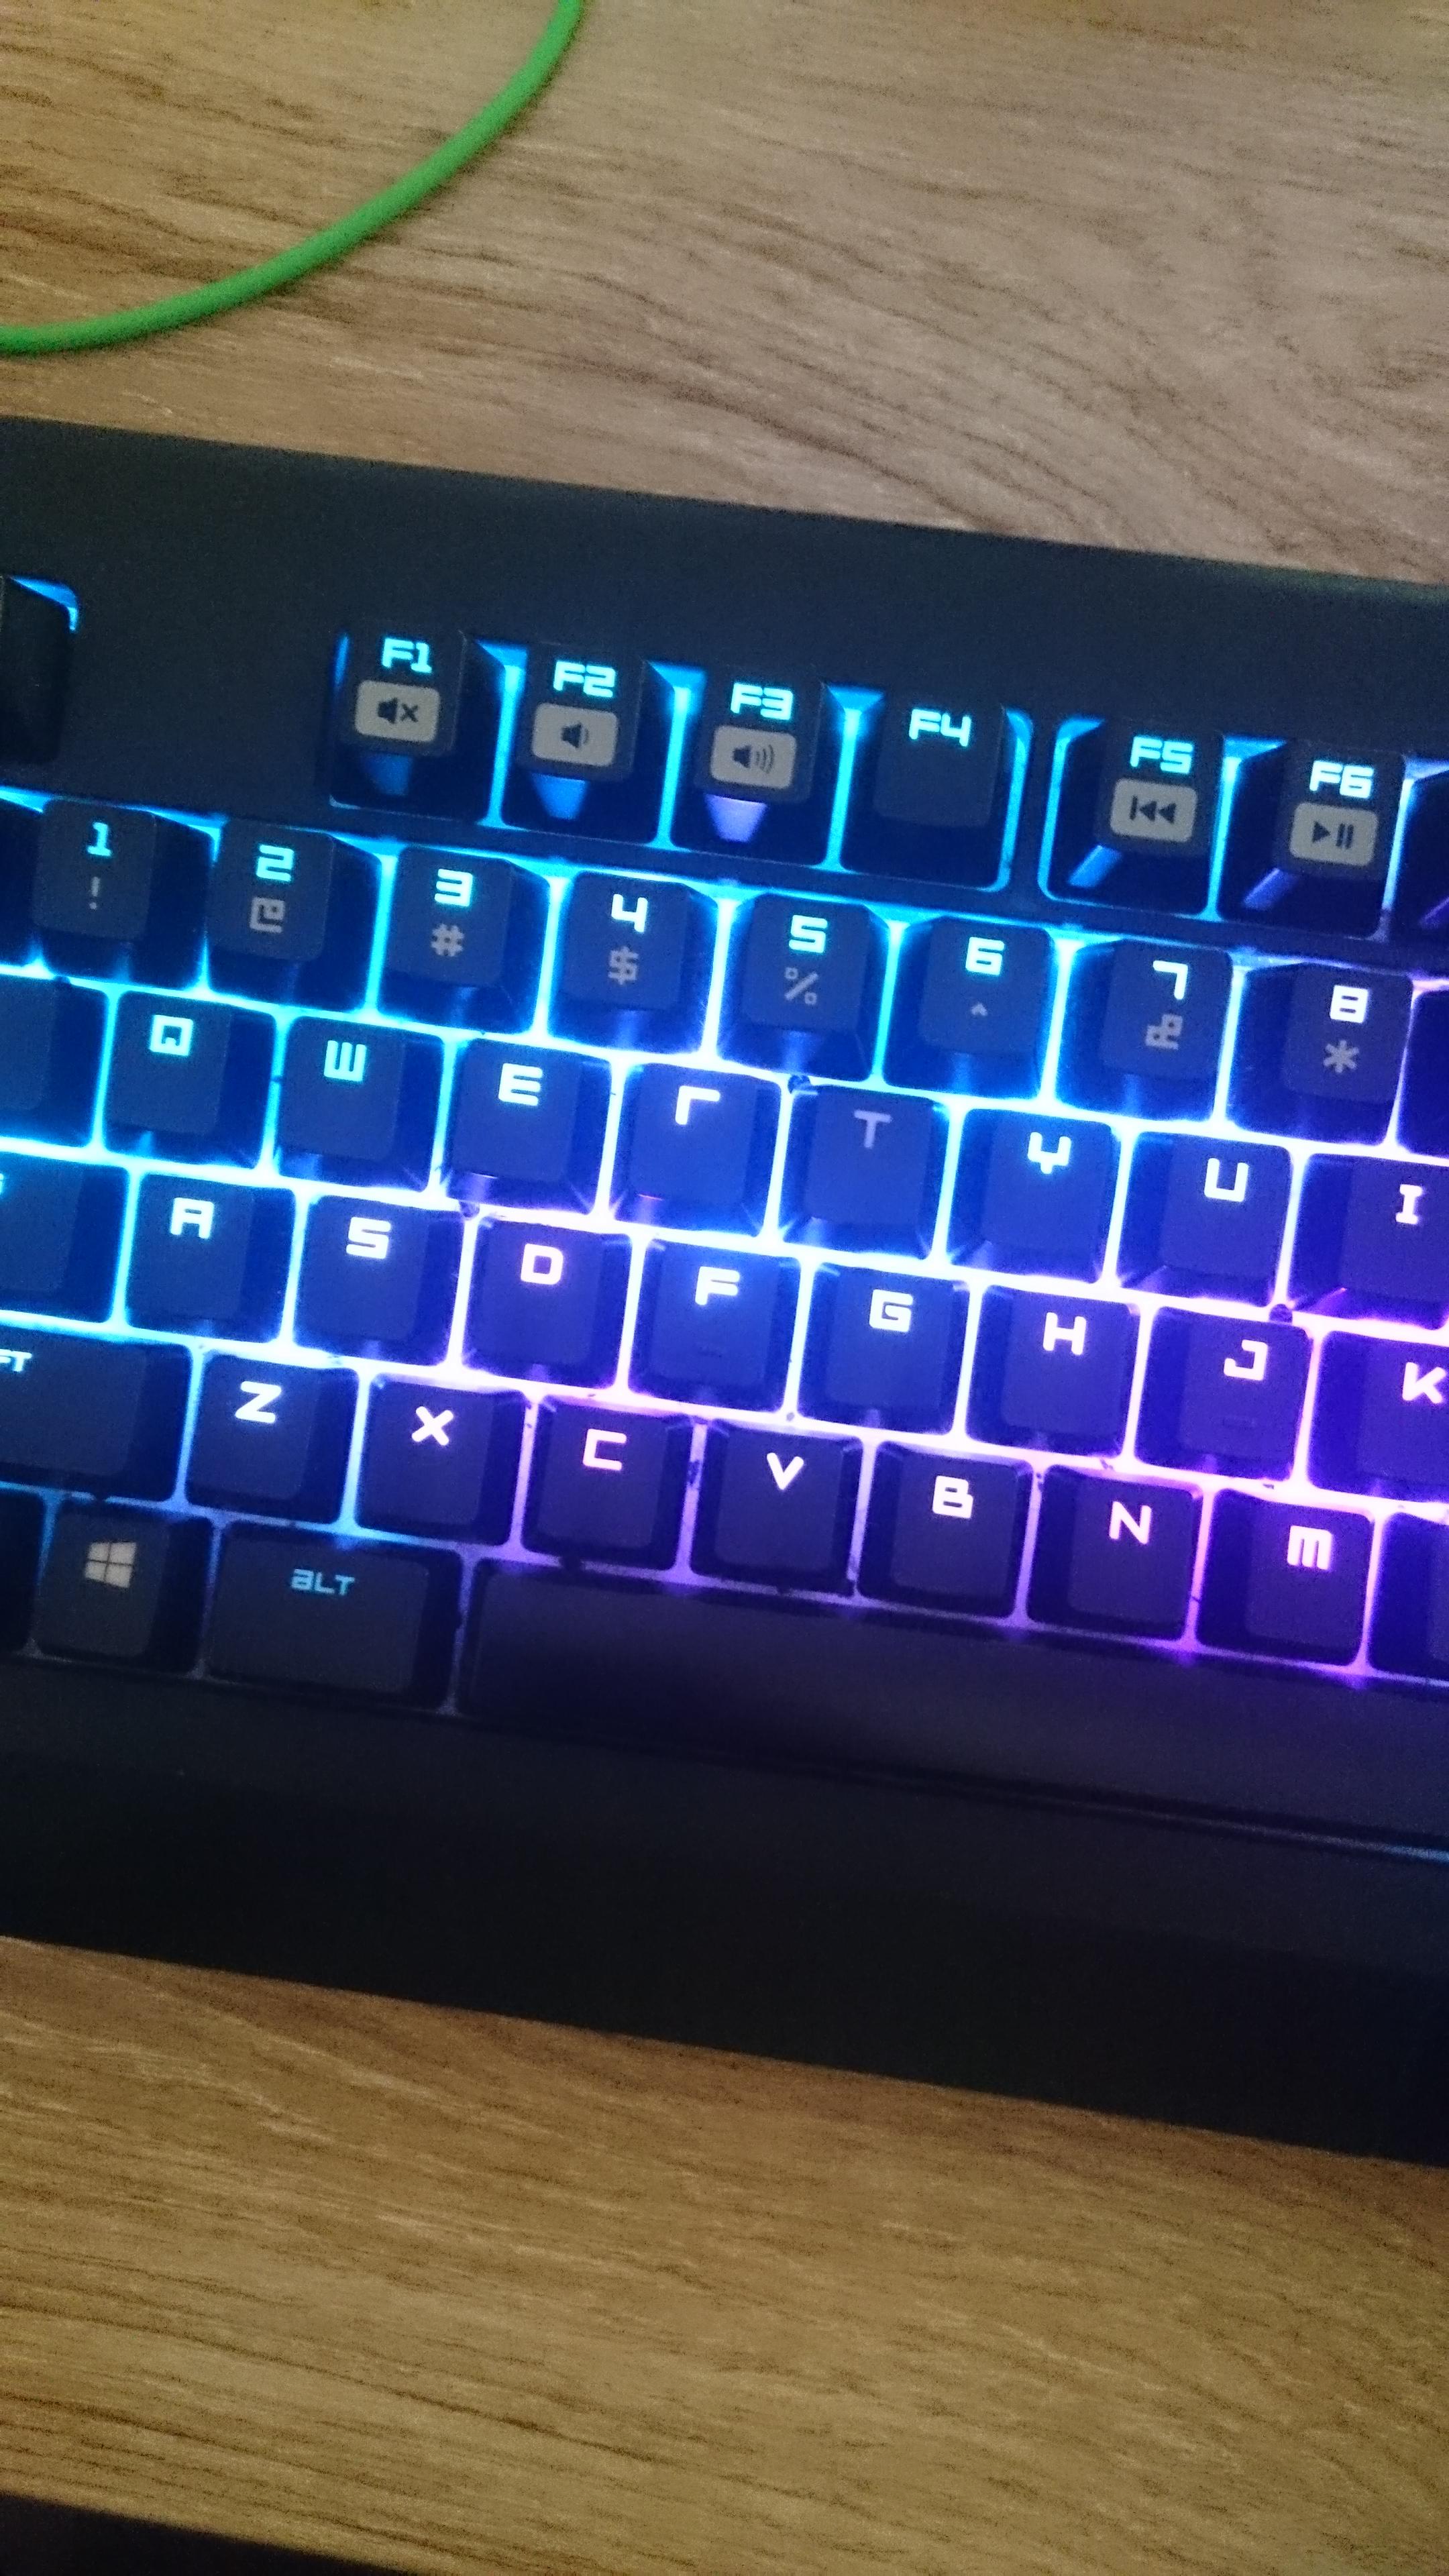 How to change razer keyboard color on ps4